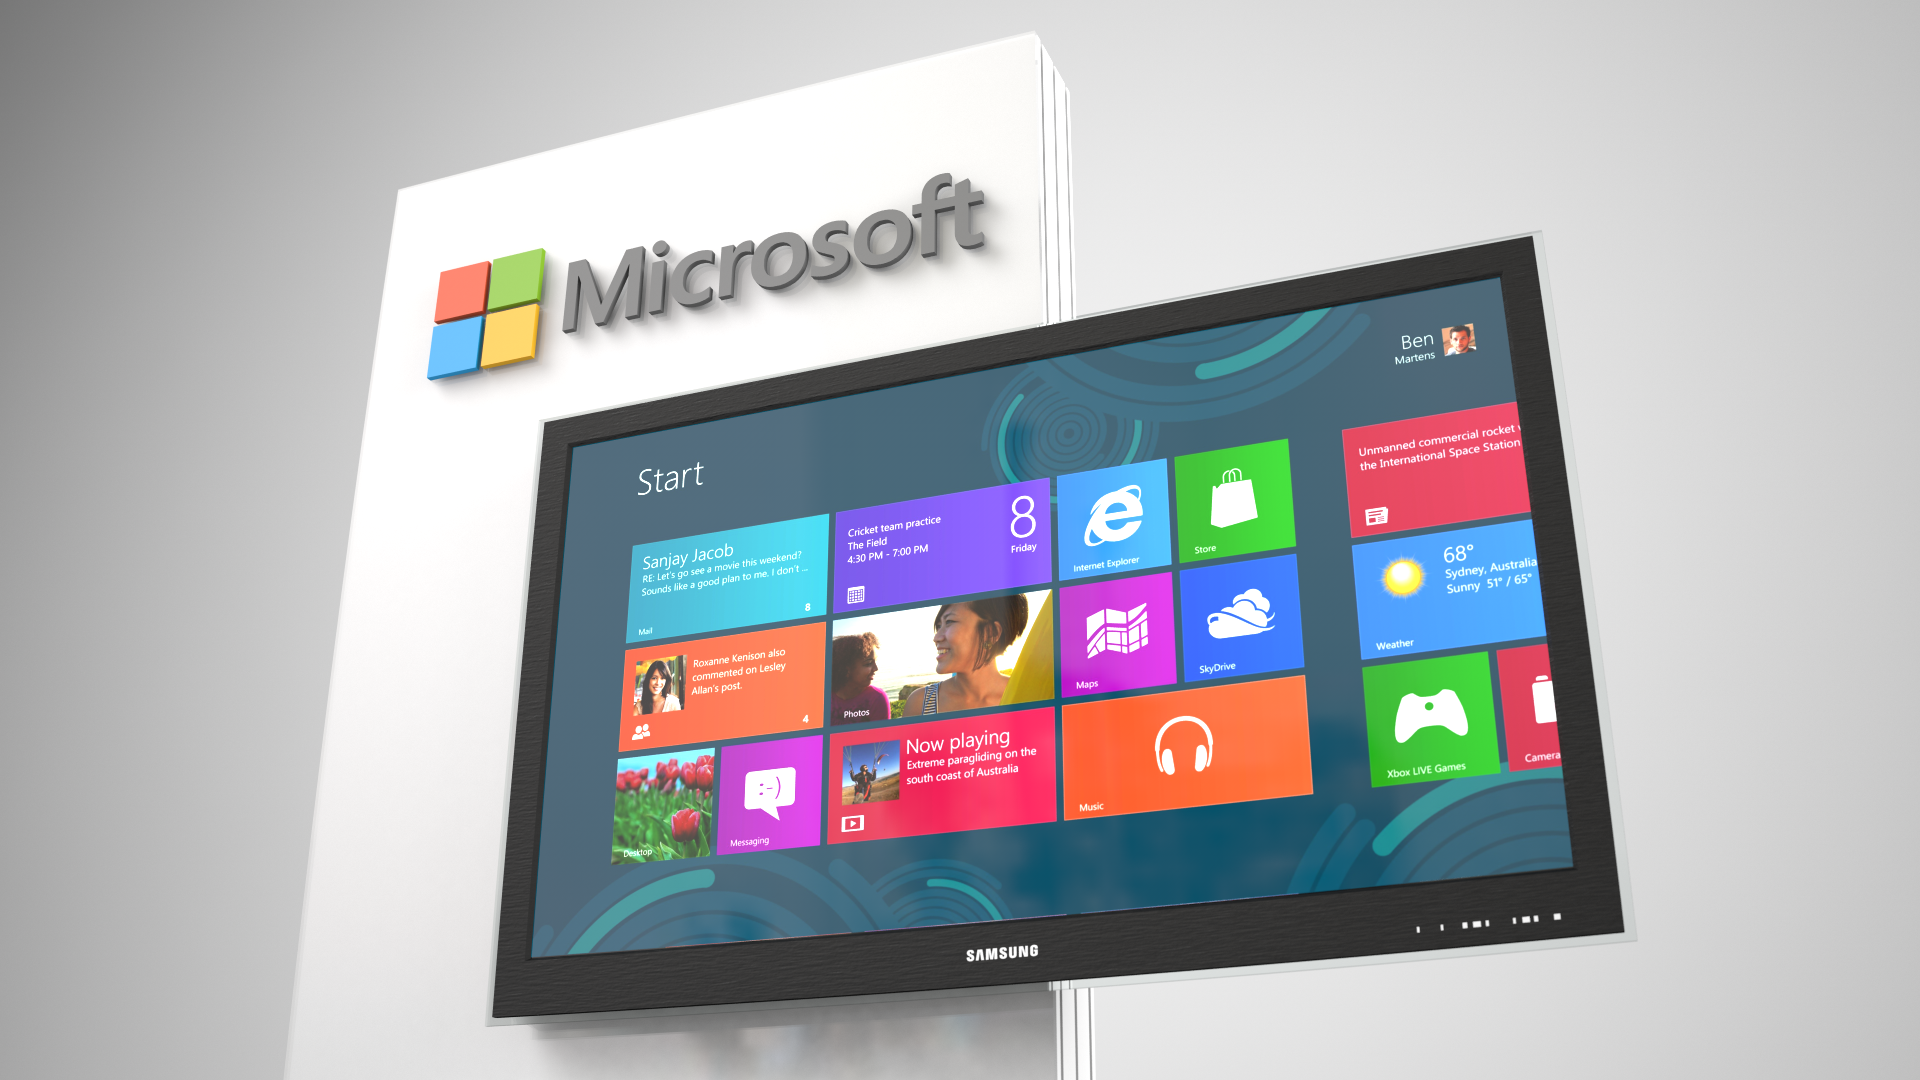 Microsoft's kiosks feature custom cabinetry and millwork, dimensional logo, vibrant graphics and integrated media devices